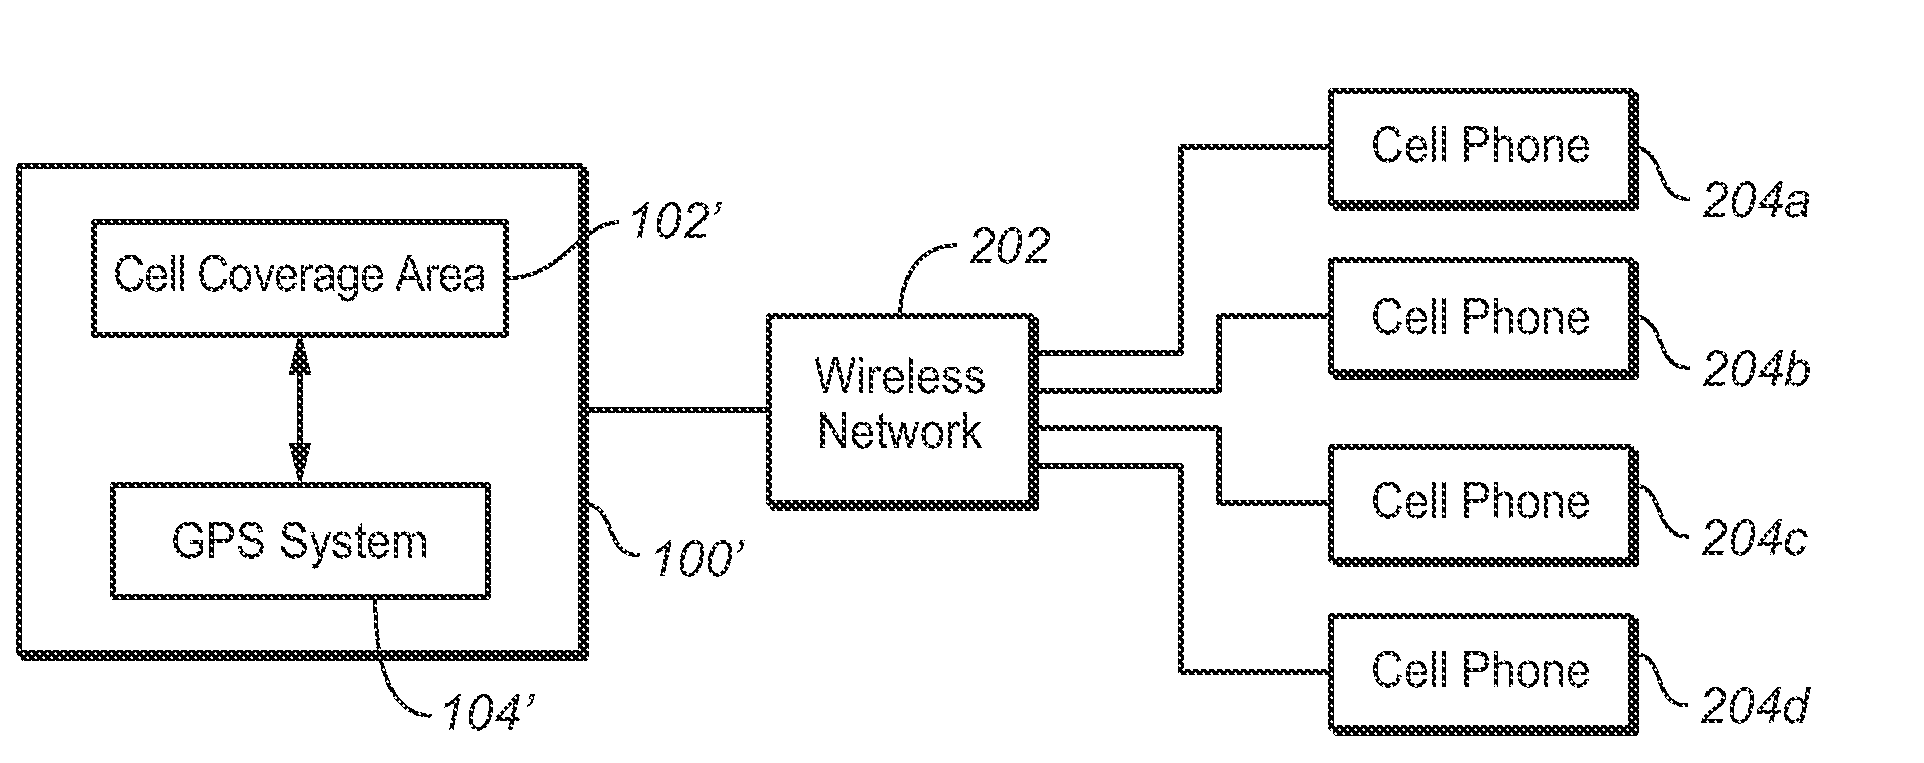 Method And System For Providing Route Alternatives While Using A Cell Phone